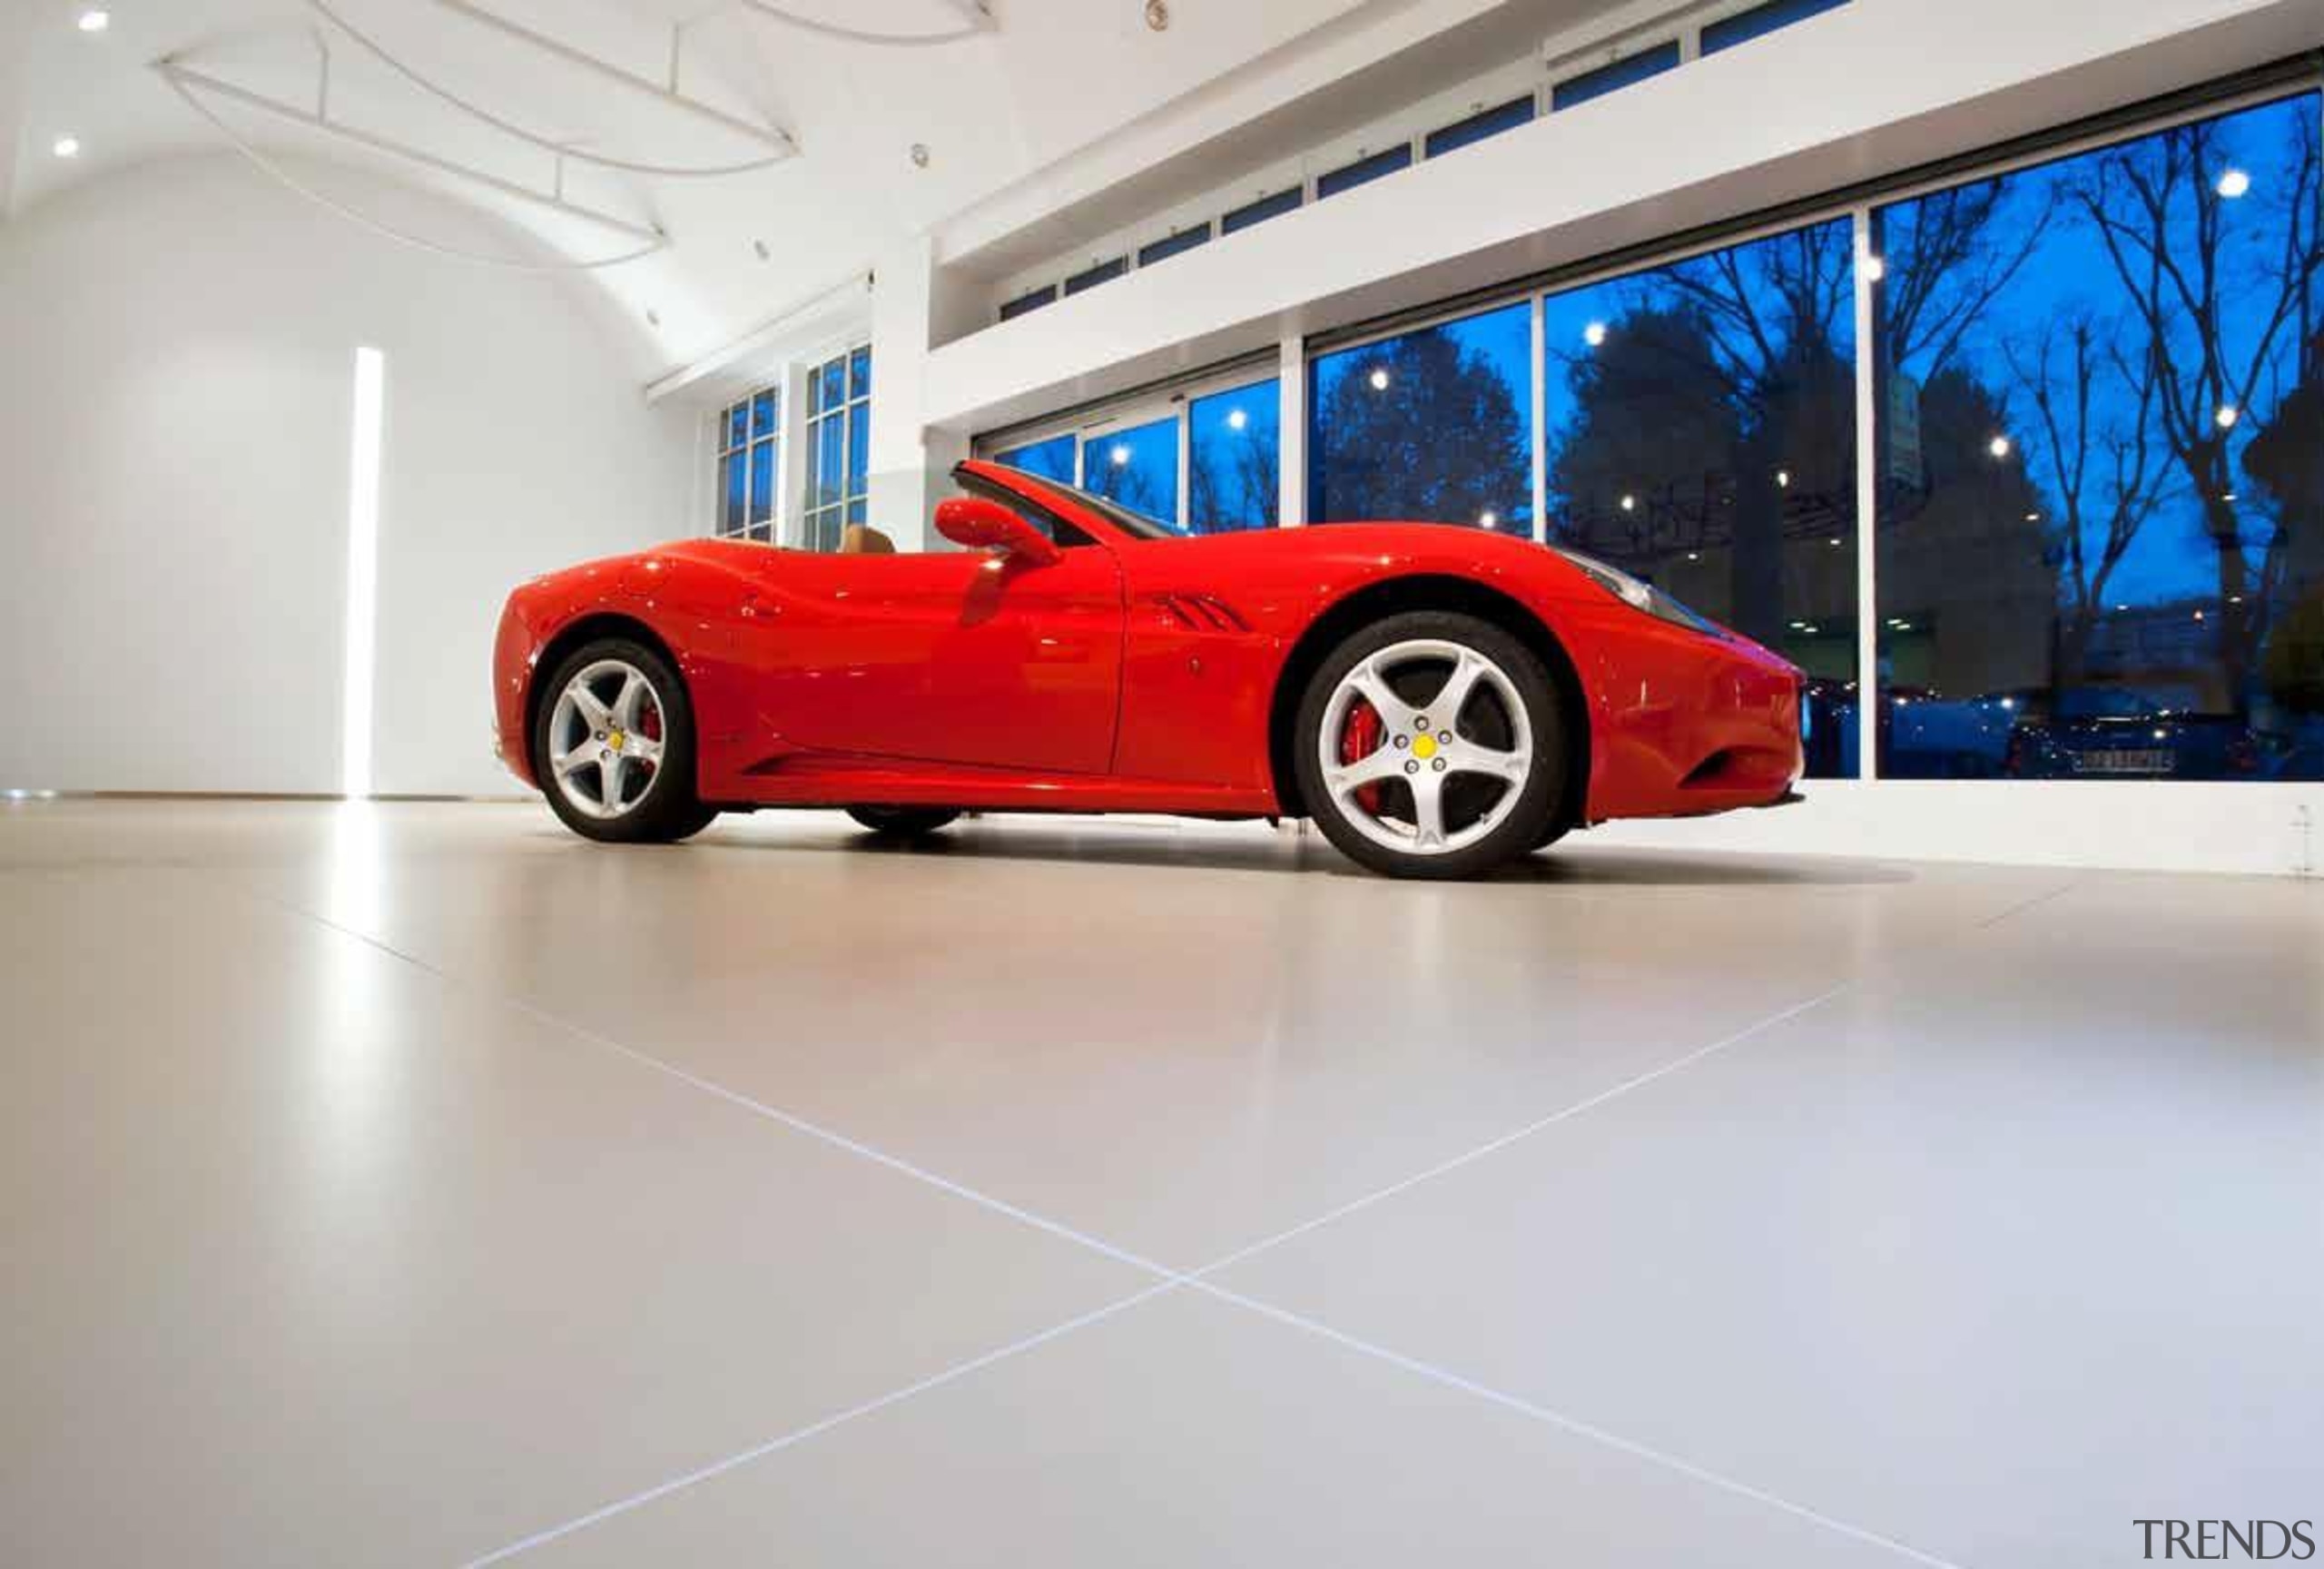 Laminam is a new concept in decorative surfaces automotive design, car, ferrari california, floor, land vehicle, luxury vehicle, motor vehicle, performance car, race car, red, sports car, supercar, vehicle, gray, white